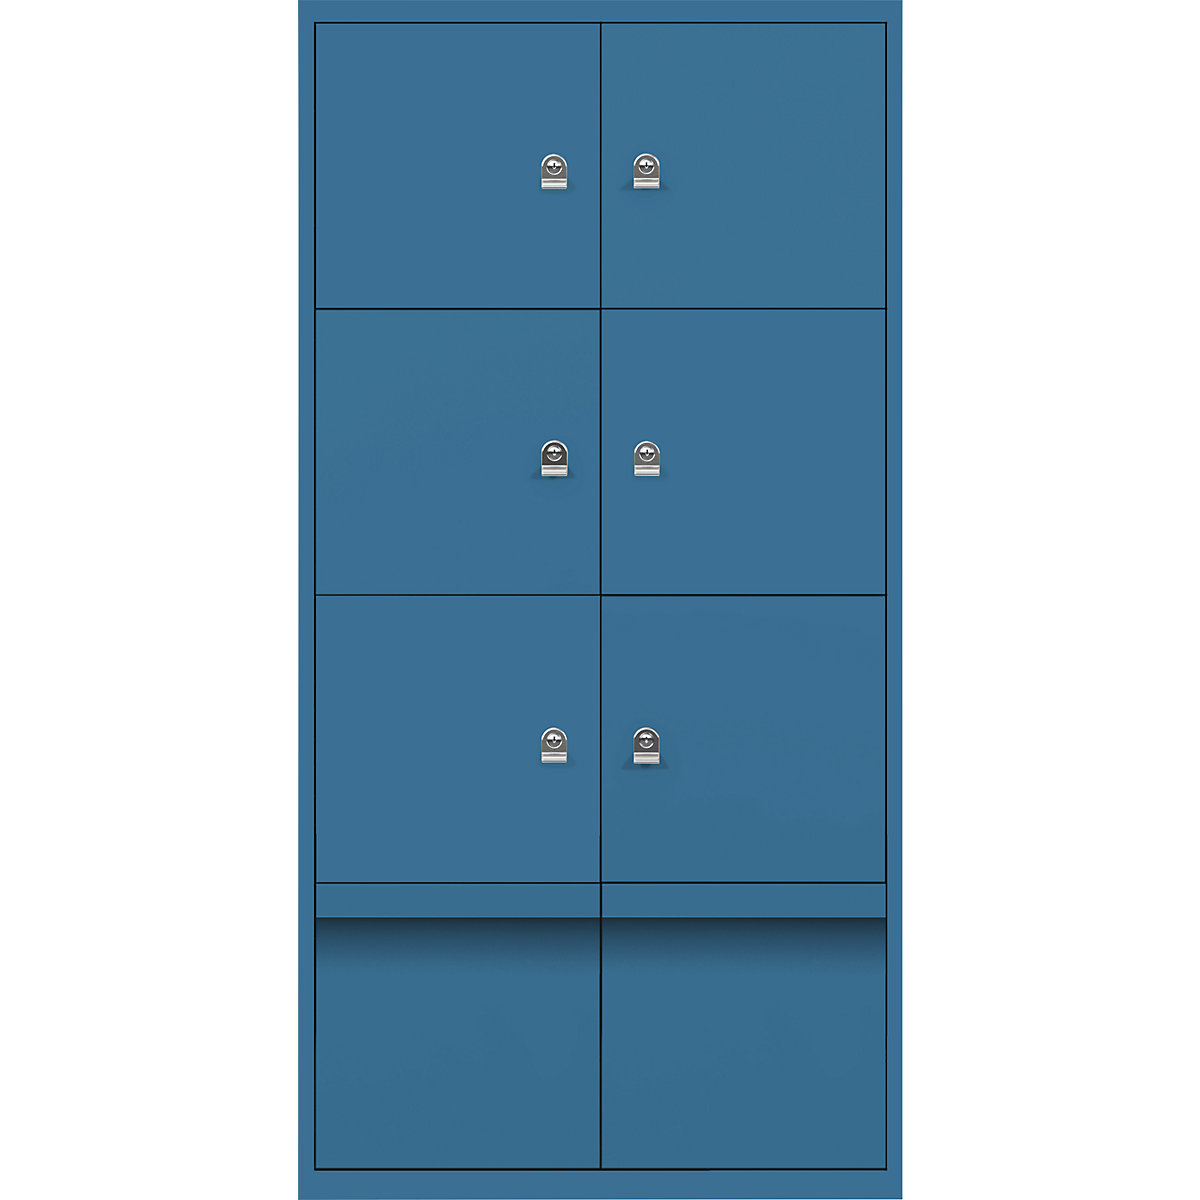 BISLEY – LateralFile™ lodge, with 6 lockable compartments and 2 drawers, height 375 mm each, azure